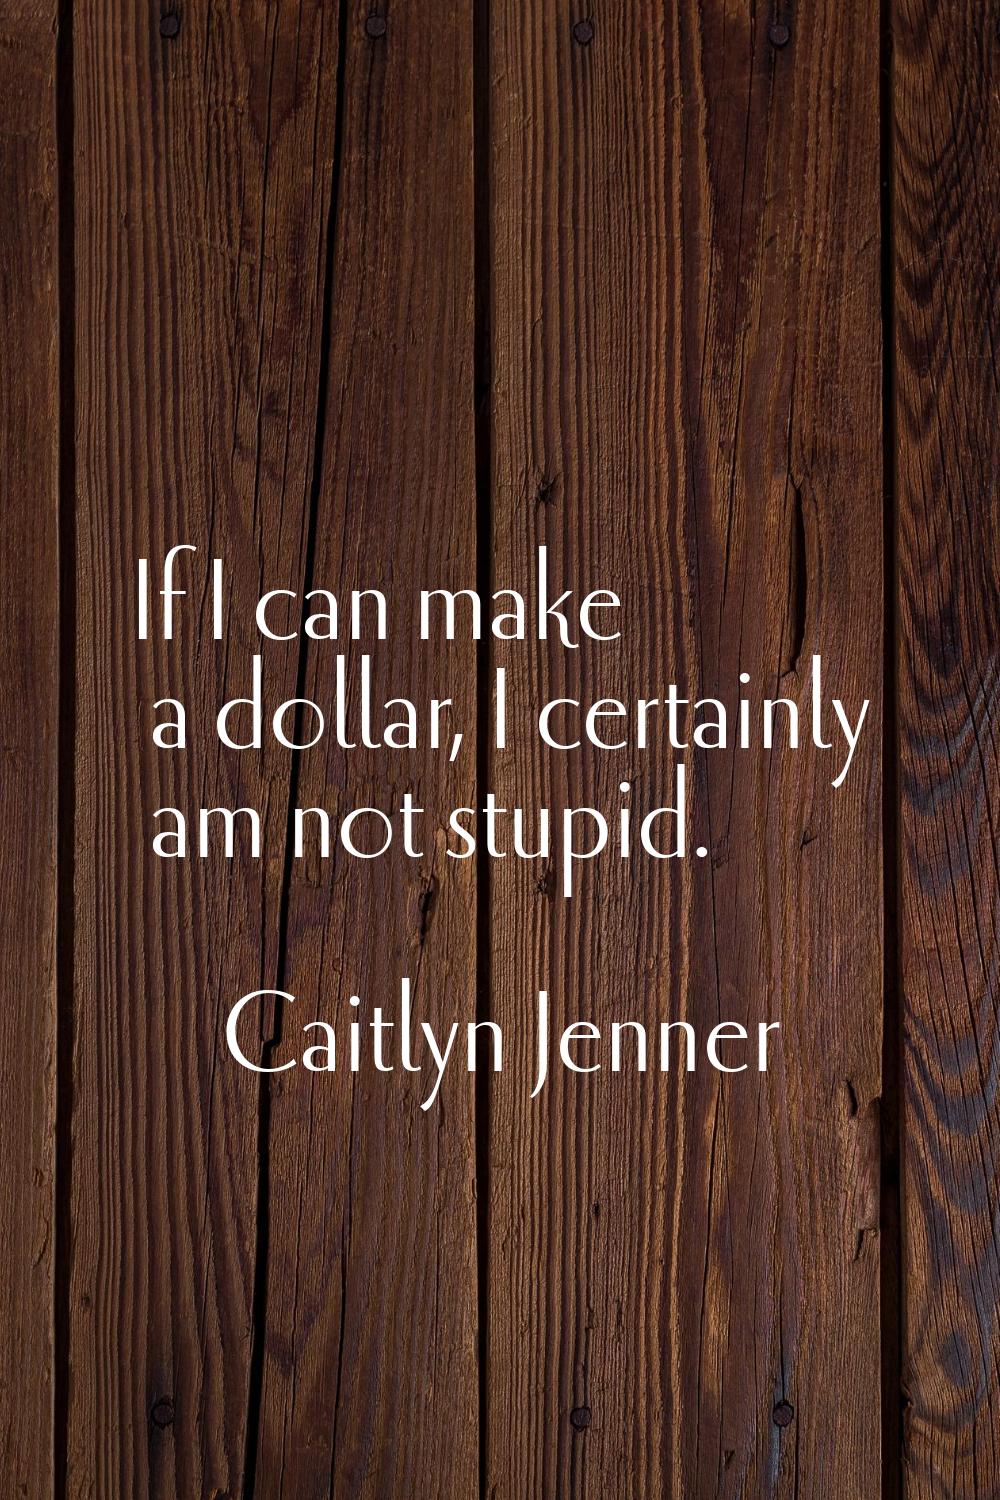 If I can make a dollar, I certainly am not stupid.